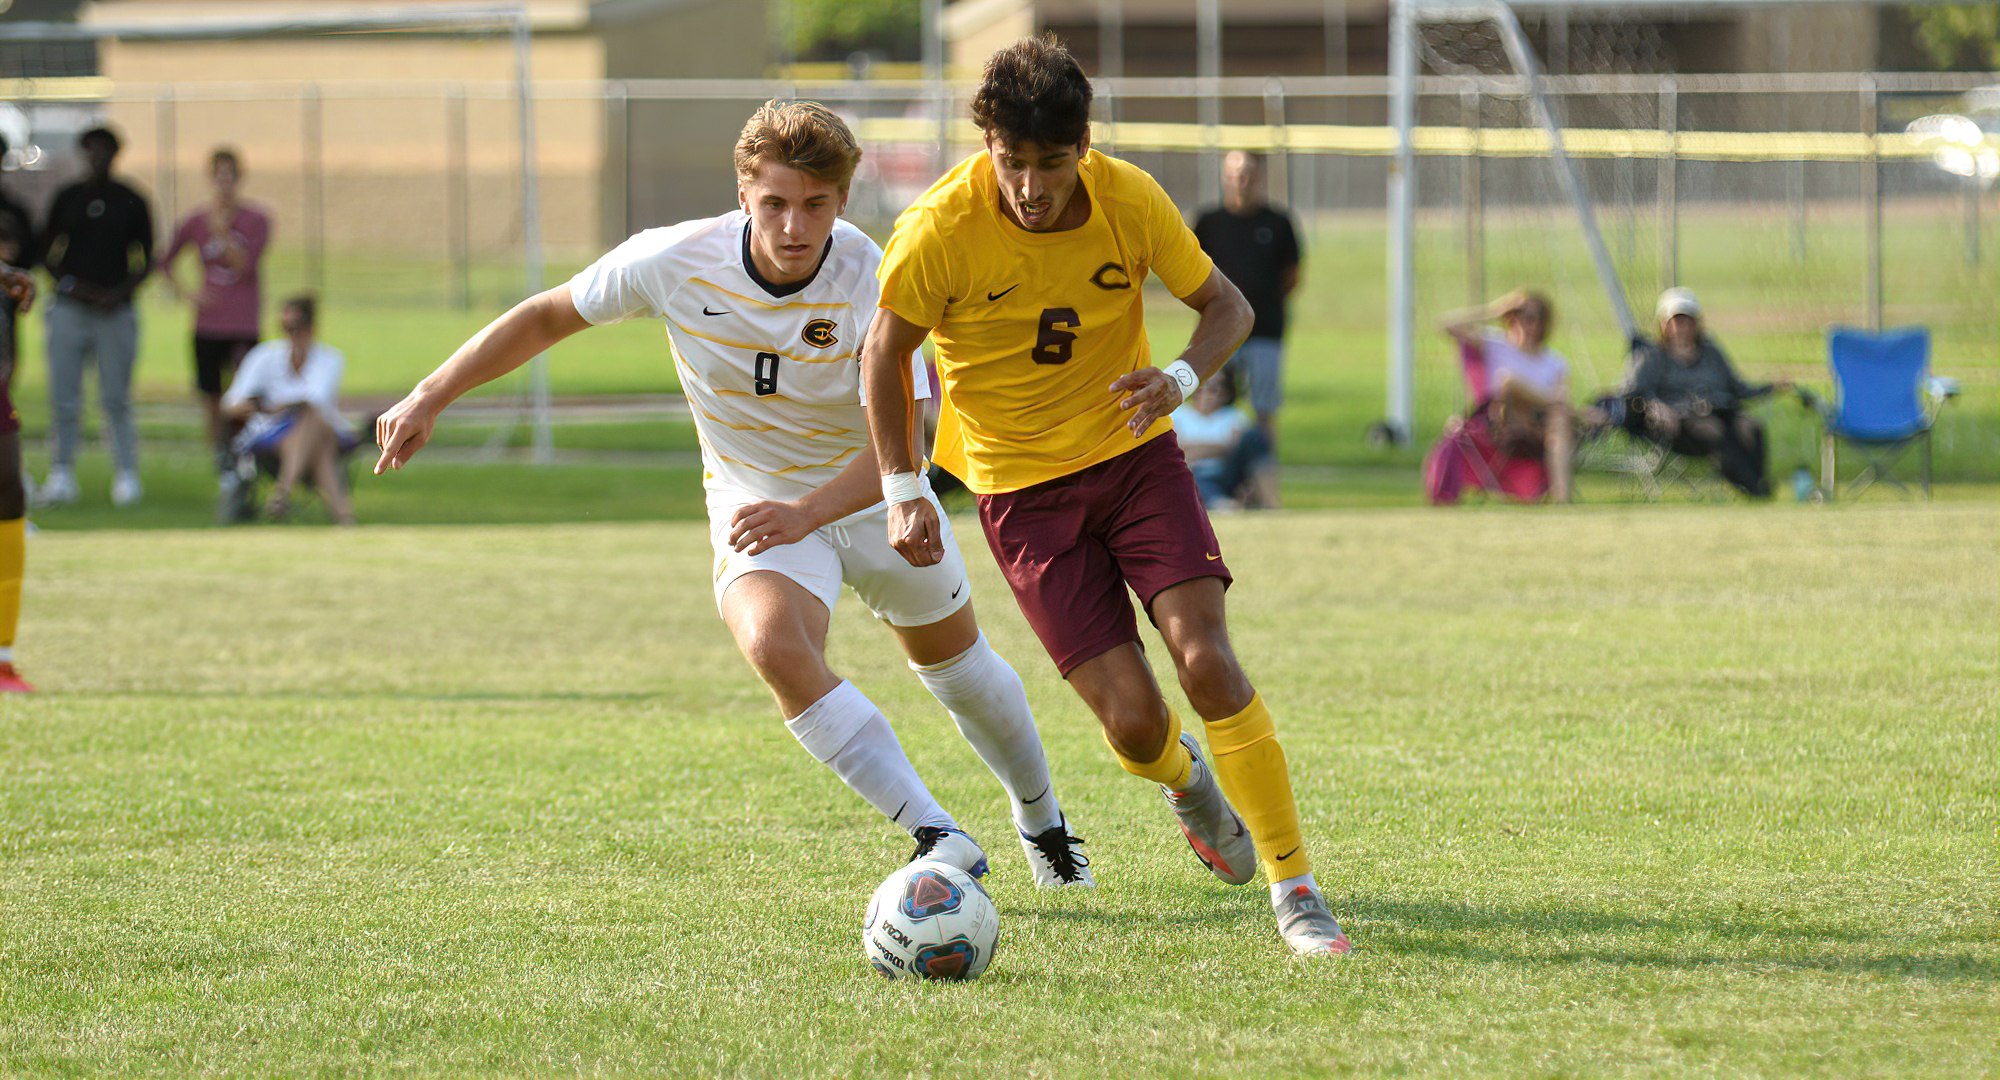 Junior defender Matthew Nemer brings the ball up the field during the Cobbers' game with Wis.-Eau Claire. Nemer had a game-high three shots on the day.